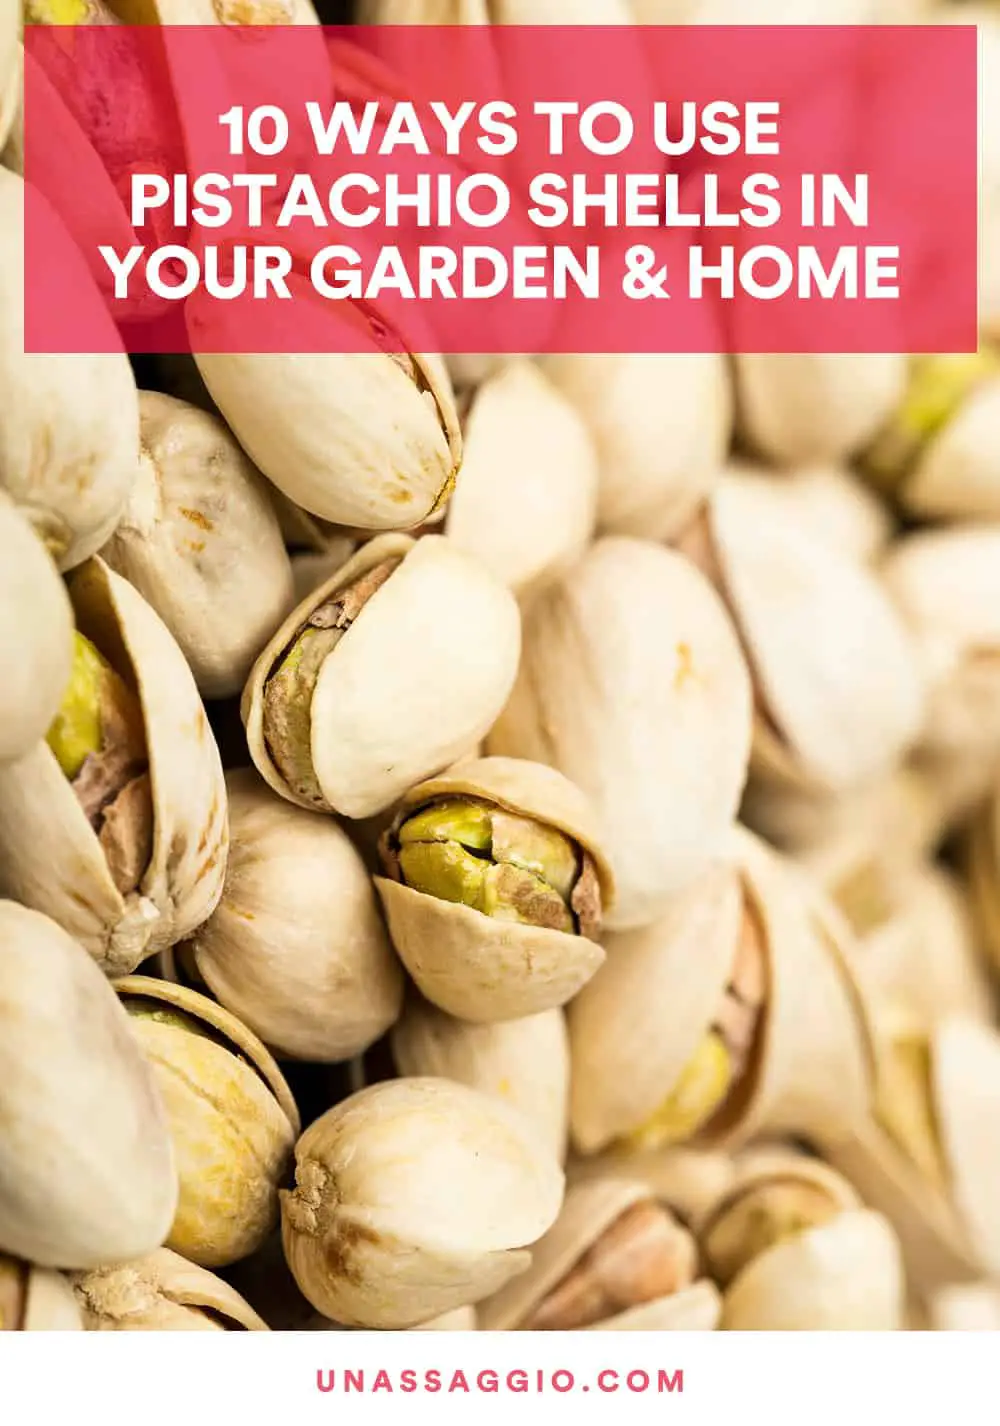 10 Creative Ways To Use Pistachio Shells In Your Garden